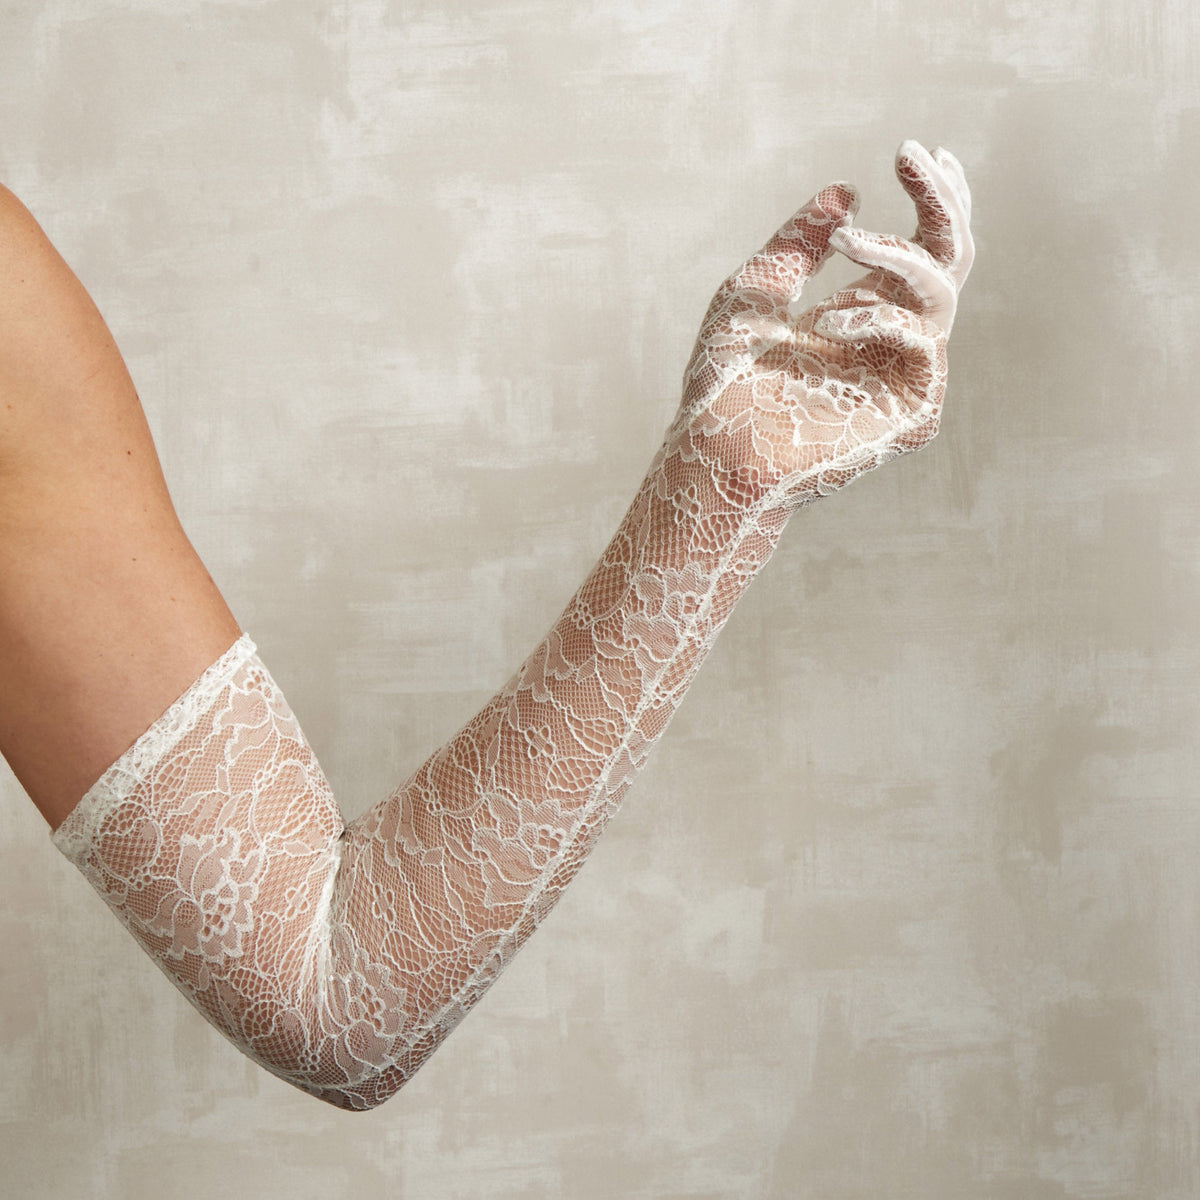 Lace Gloves - How to Wear and Where to Buy